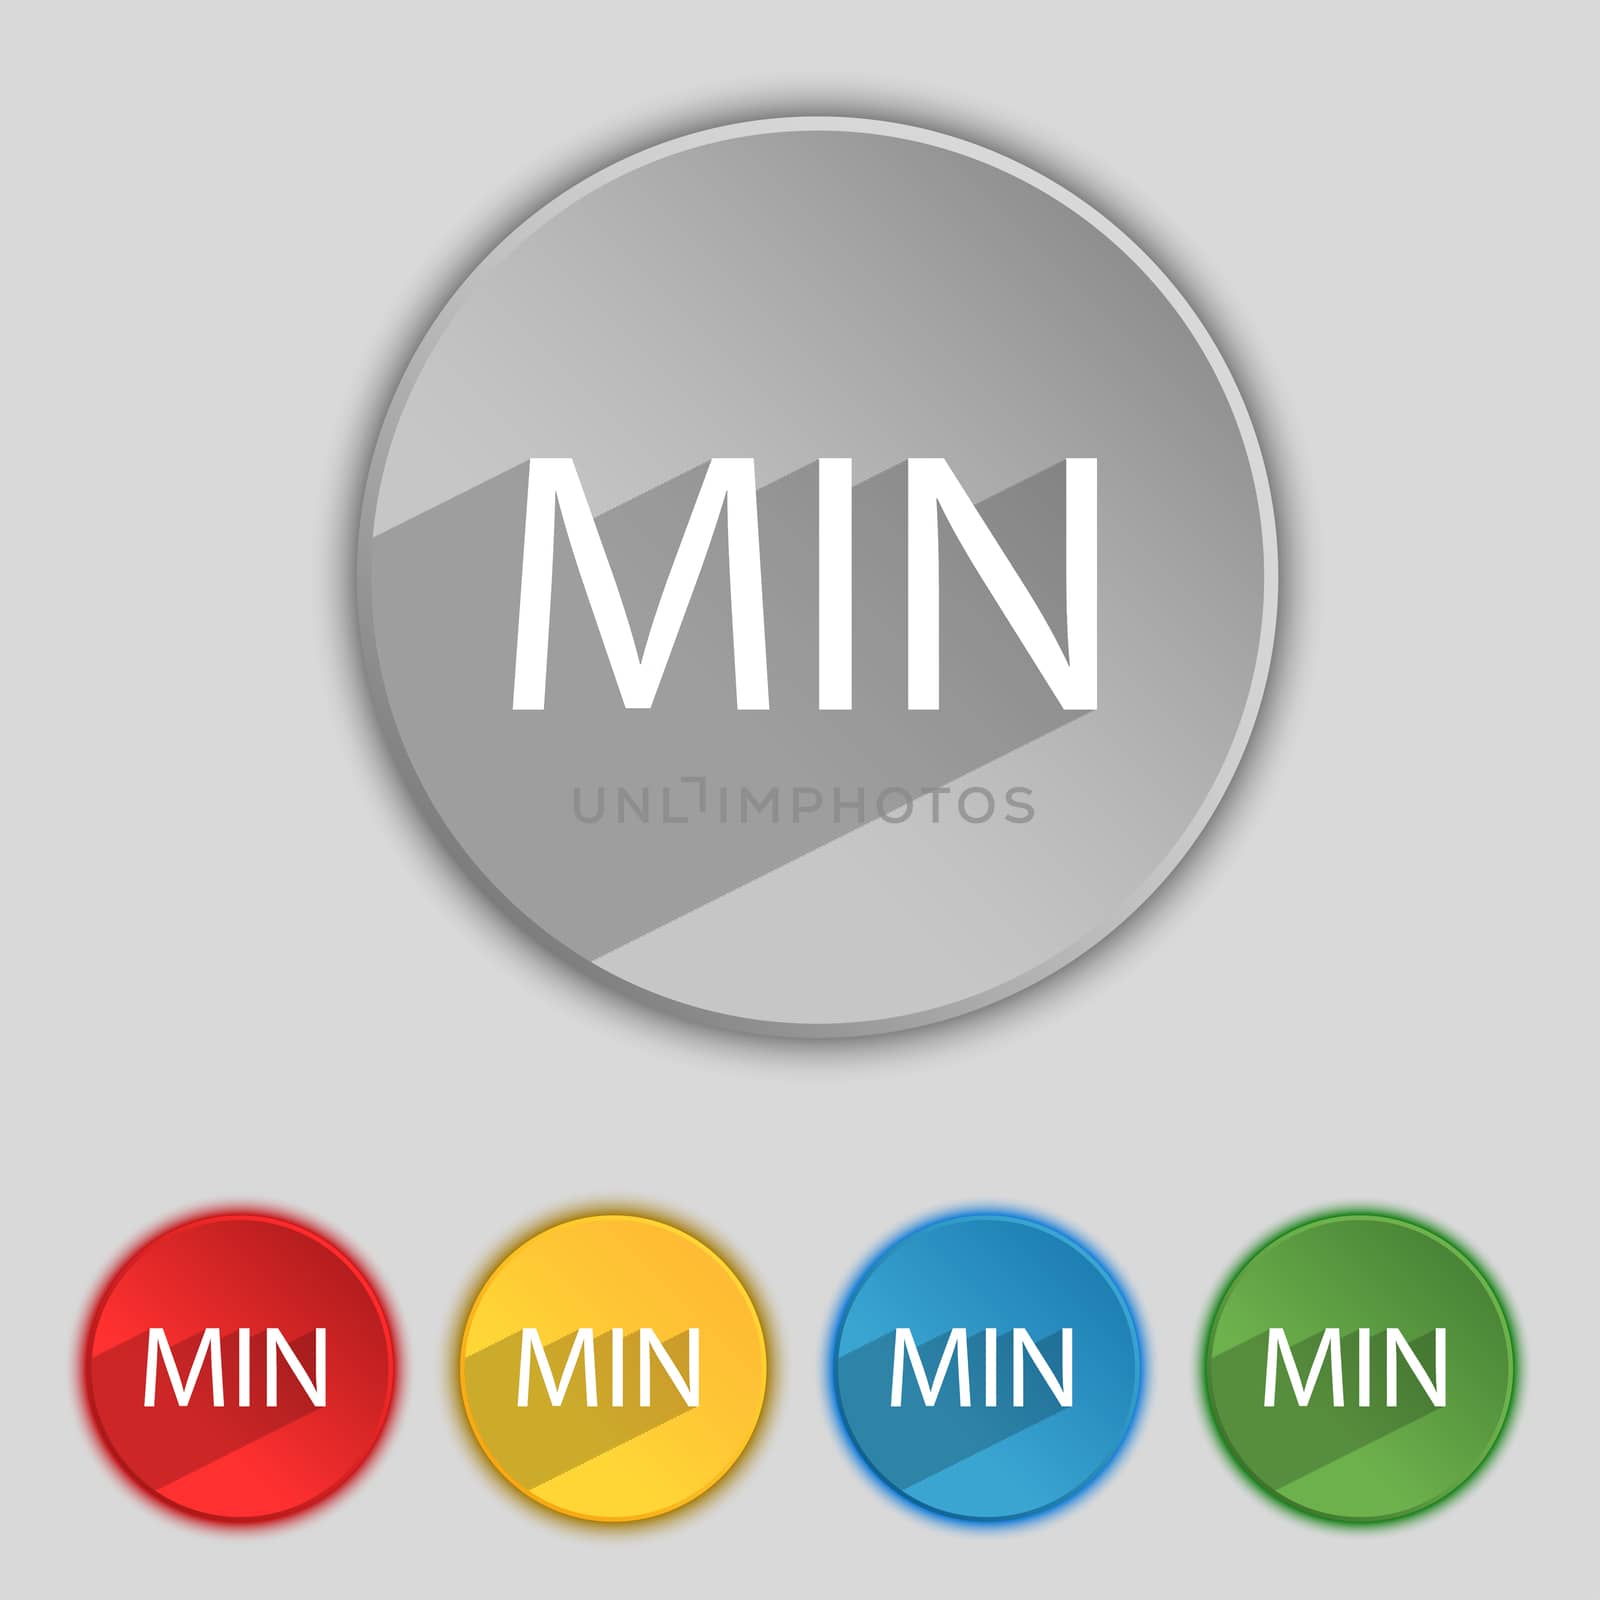 minimum sign icon. Set of colored buttons. illustration